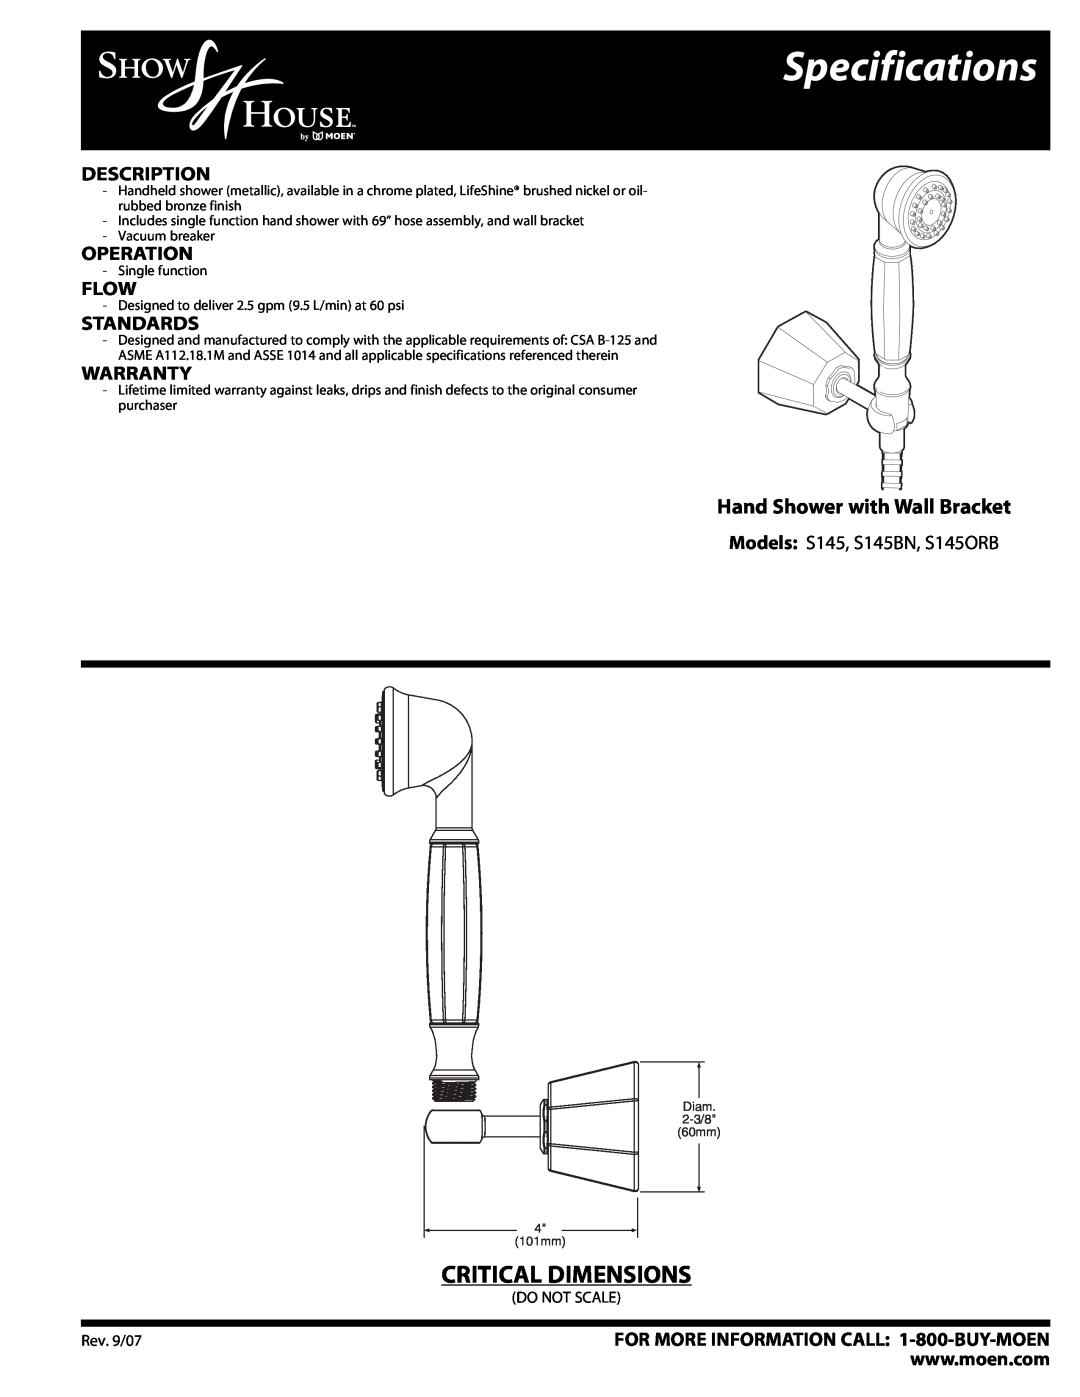 Moen S145 specifications Specifications, Critical Dimensions, Hand Shower with Wall Bracket, Description, Operation, Flow 